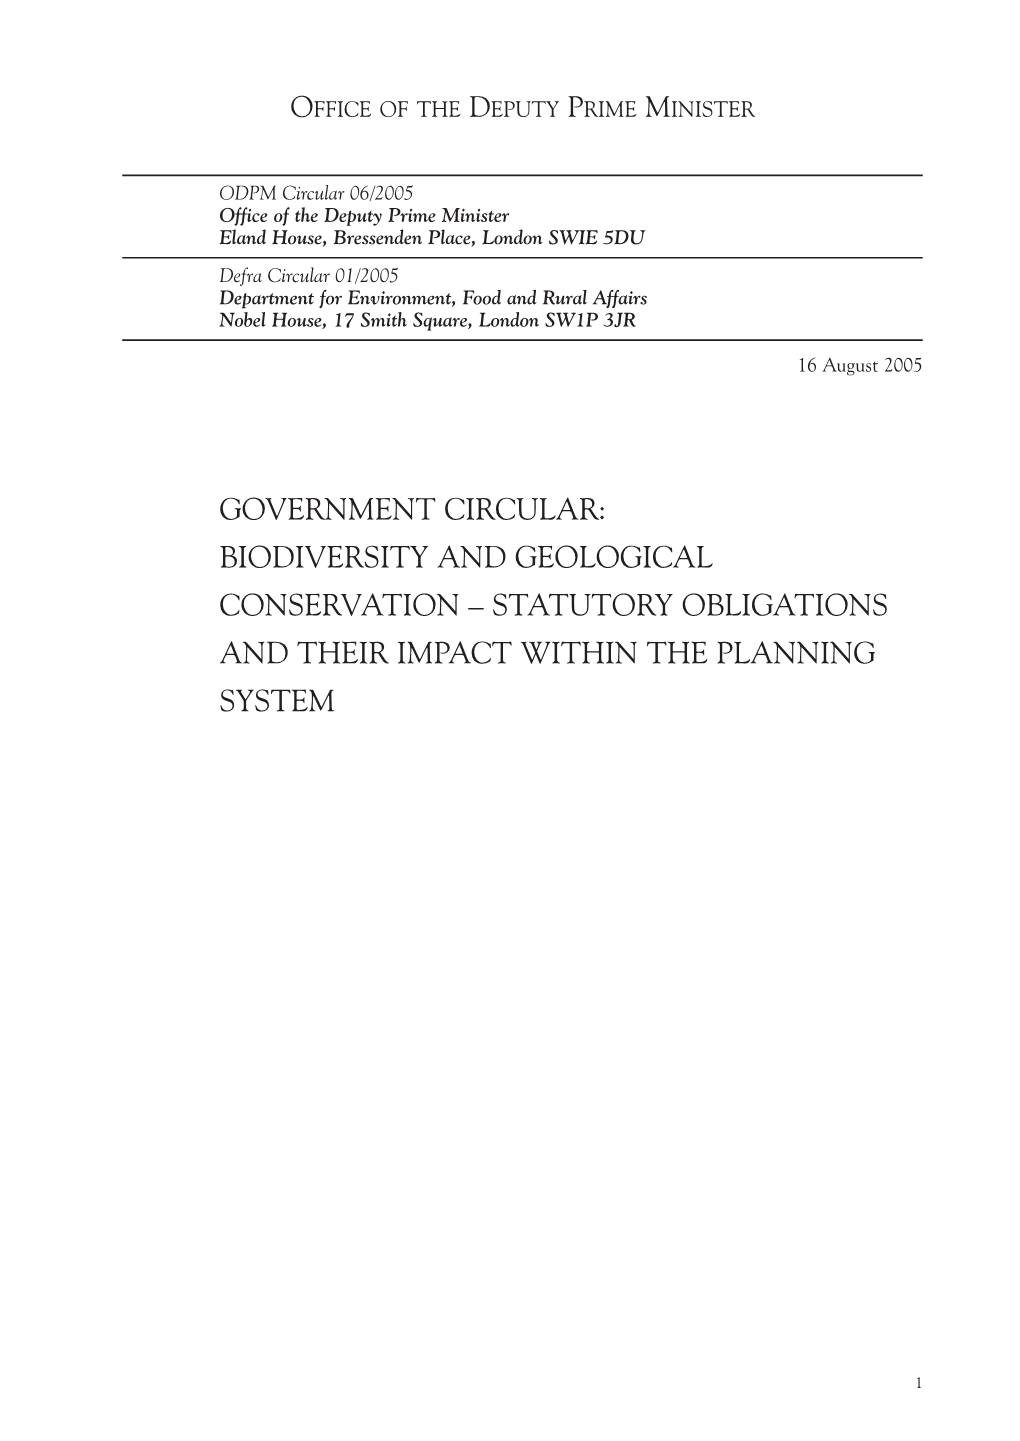 Government Circular: Biodiversity and Geological Conservation – Statutory Obligations and Their Impact Within the Planning System